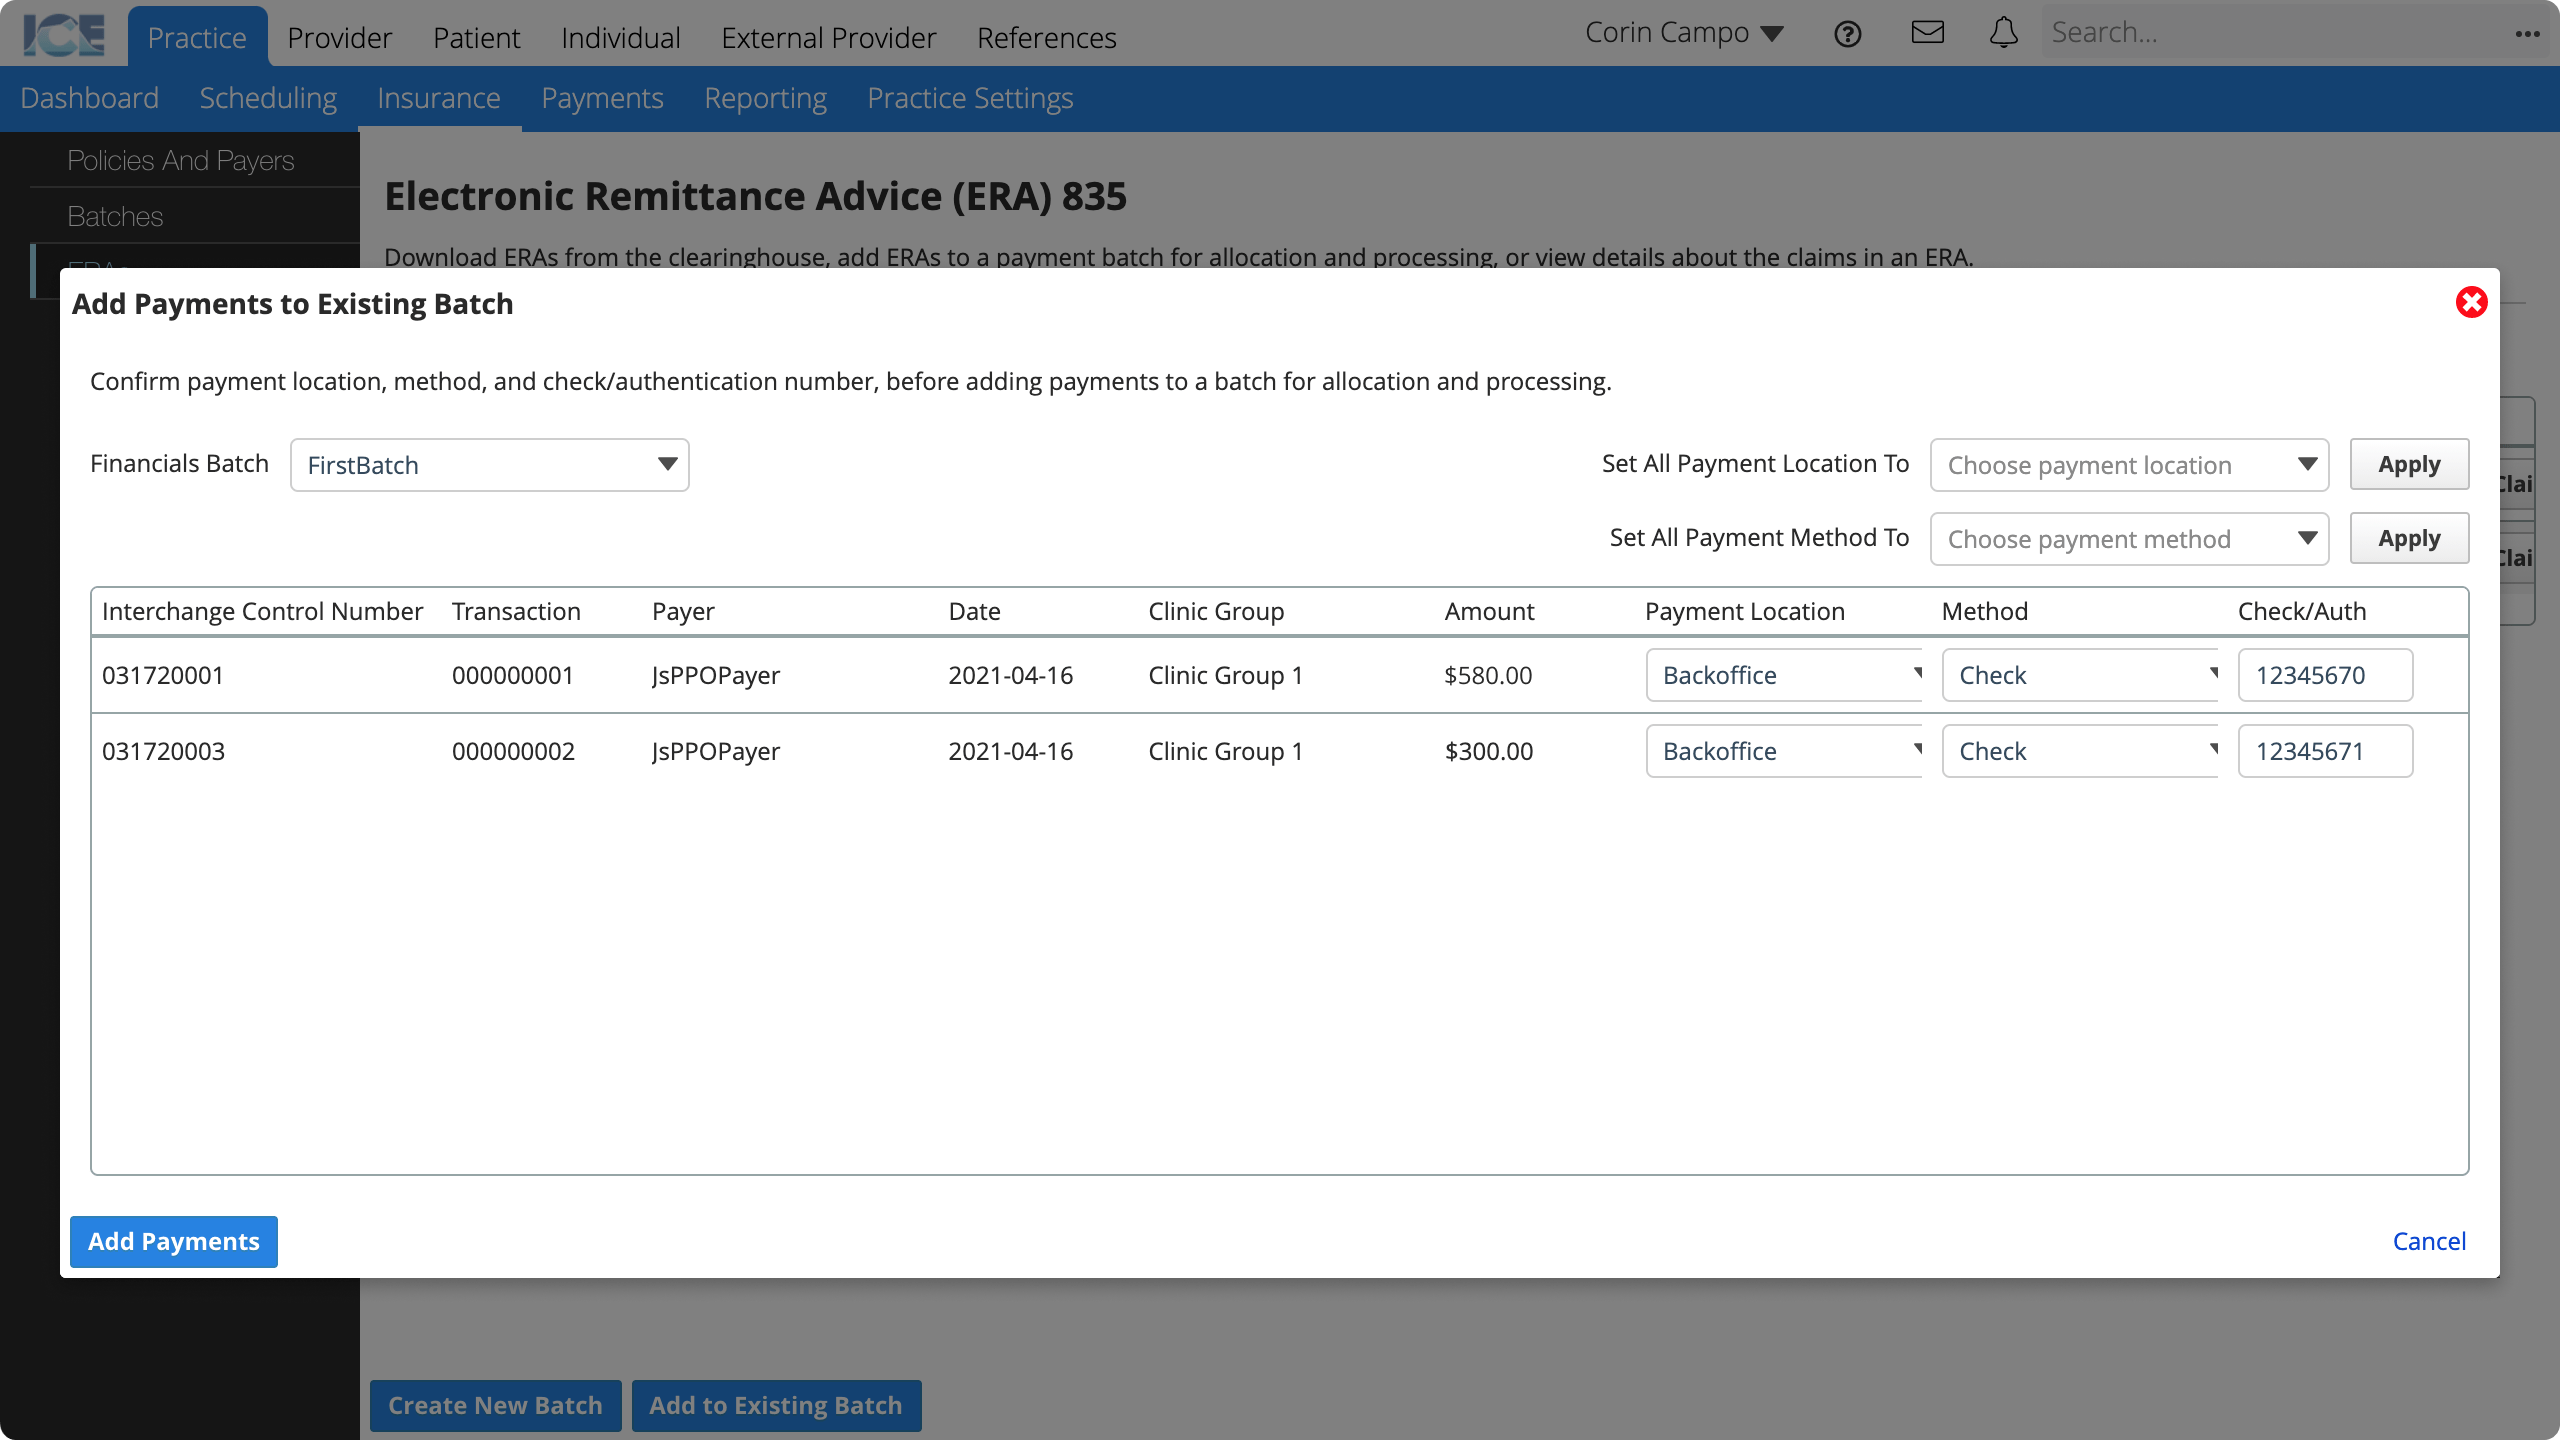 The Add Payments to Batch dialog displays a table of the payment details you selected, with options to choose a Batch, and to set Payment Locations and Payment Methods.